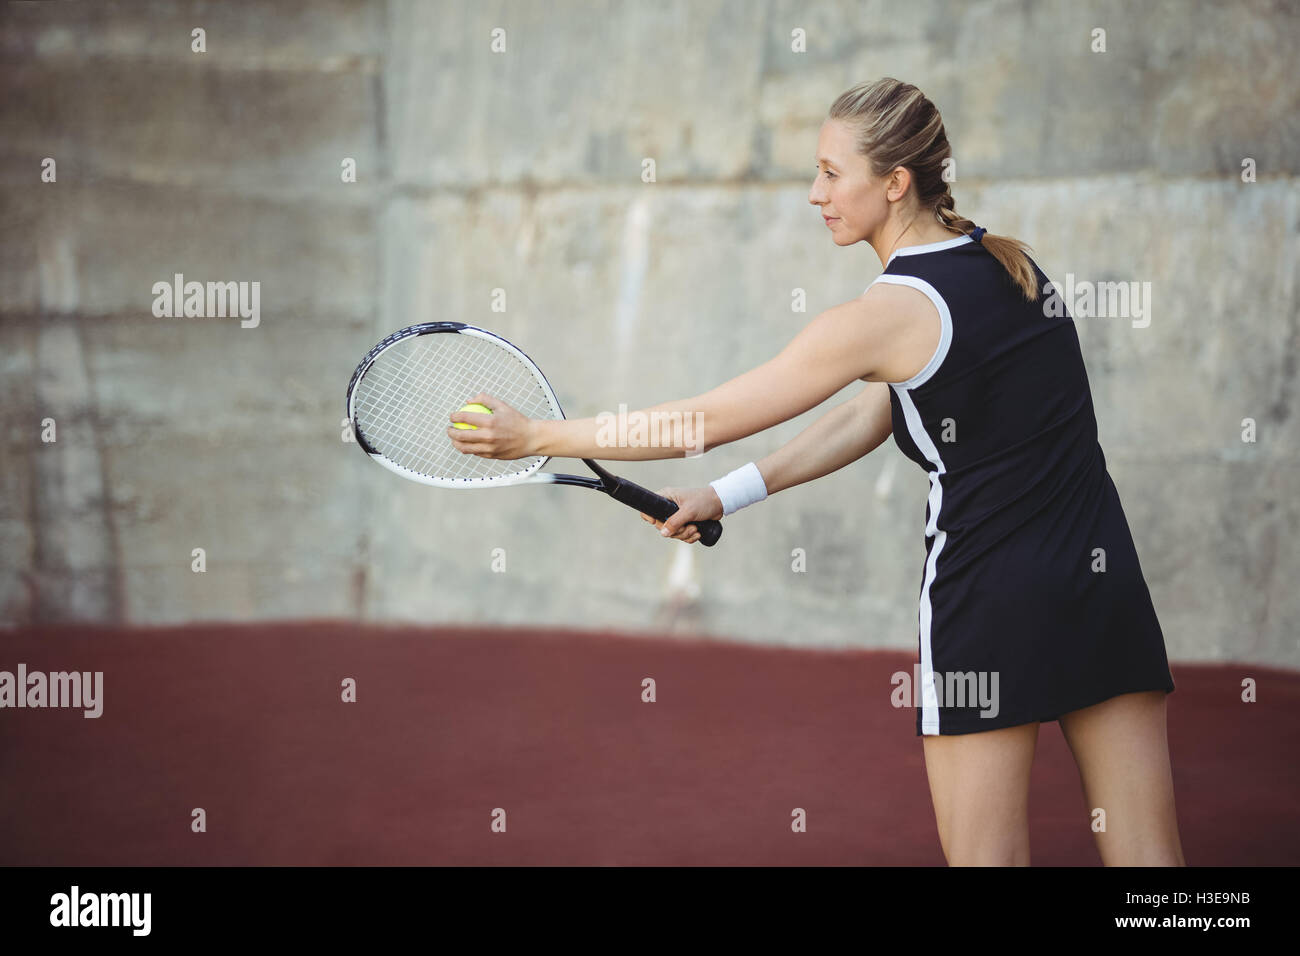 Woman with tennis racket ready to serve Stock Photo